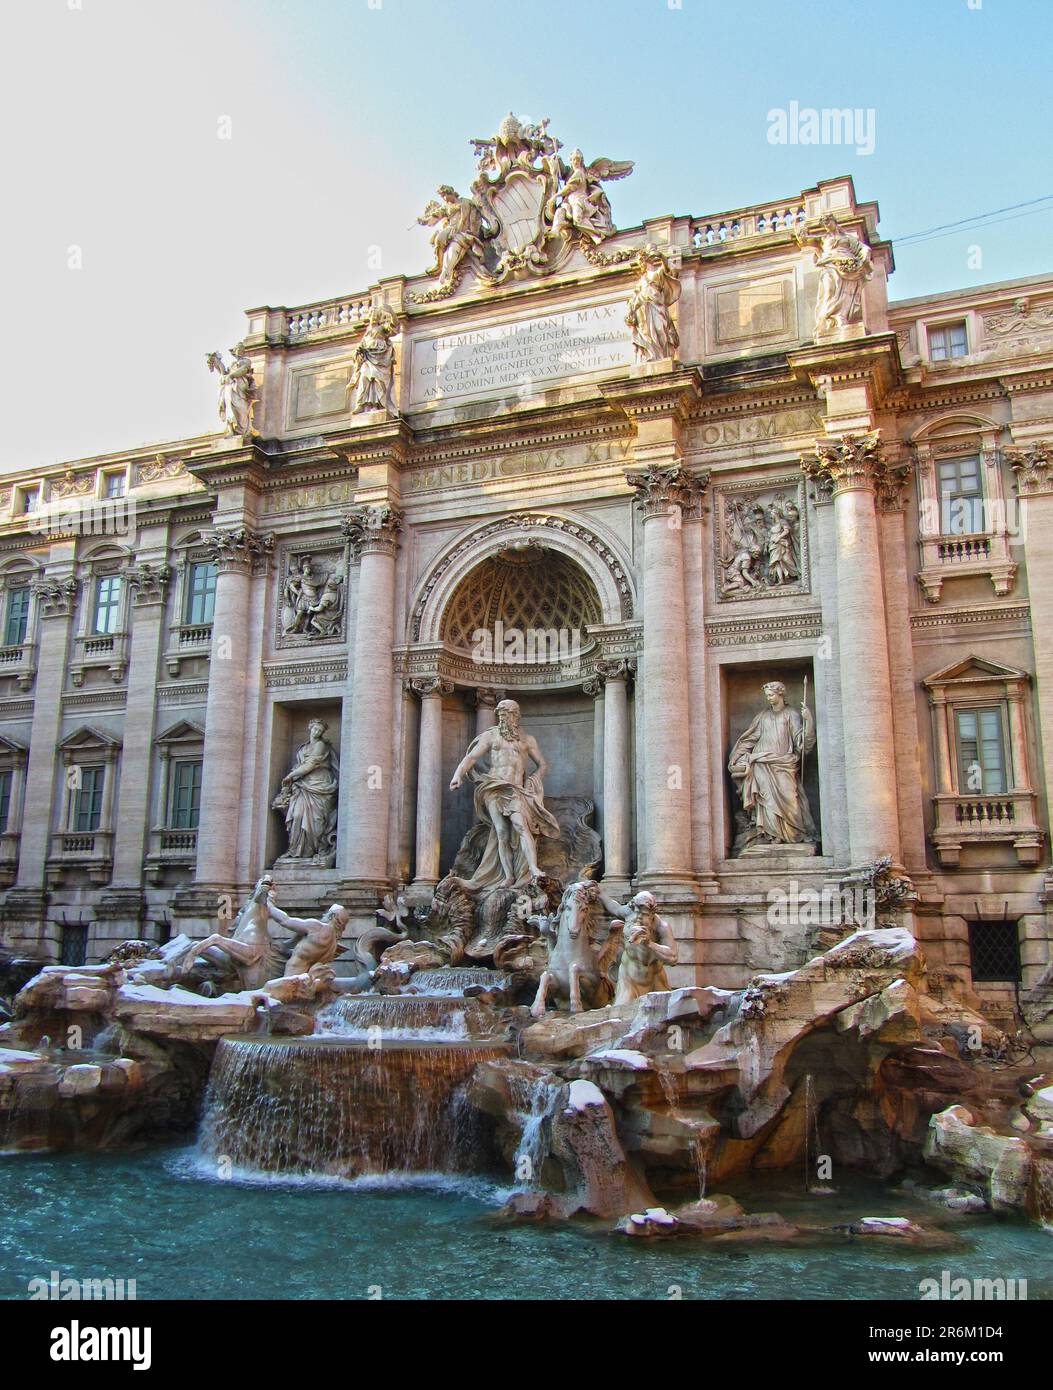 A majestic building with intricate stonework and statuesque figures in the foreground, set against a tranquil backdrop of a flowing fountain Stock Photo